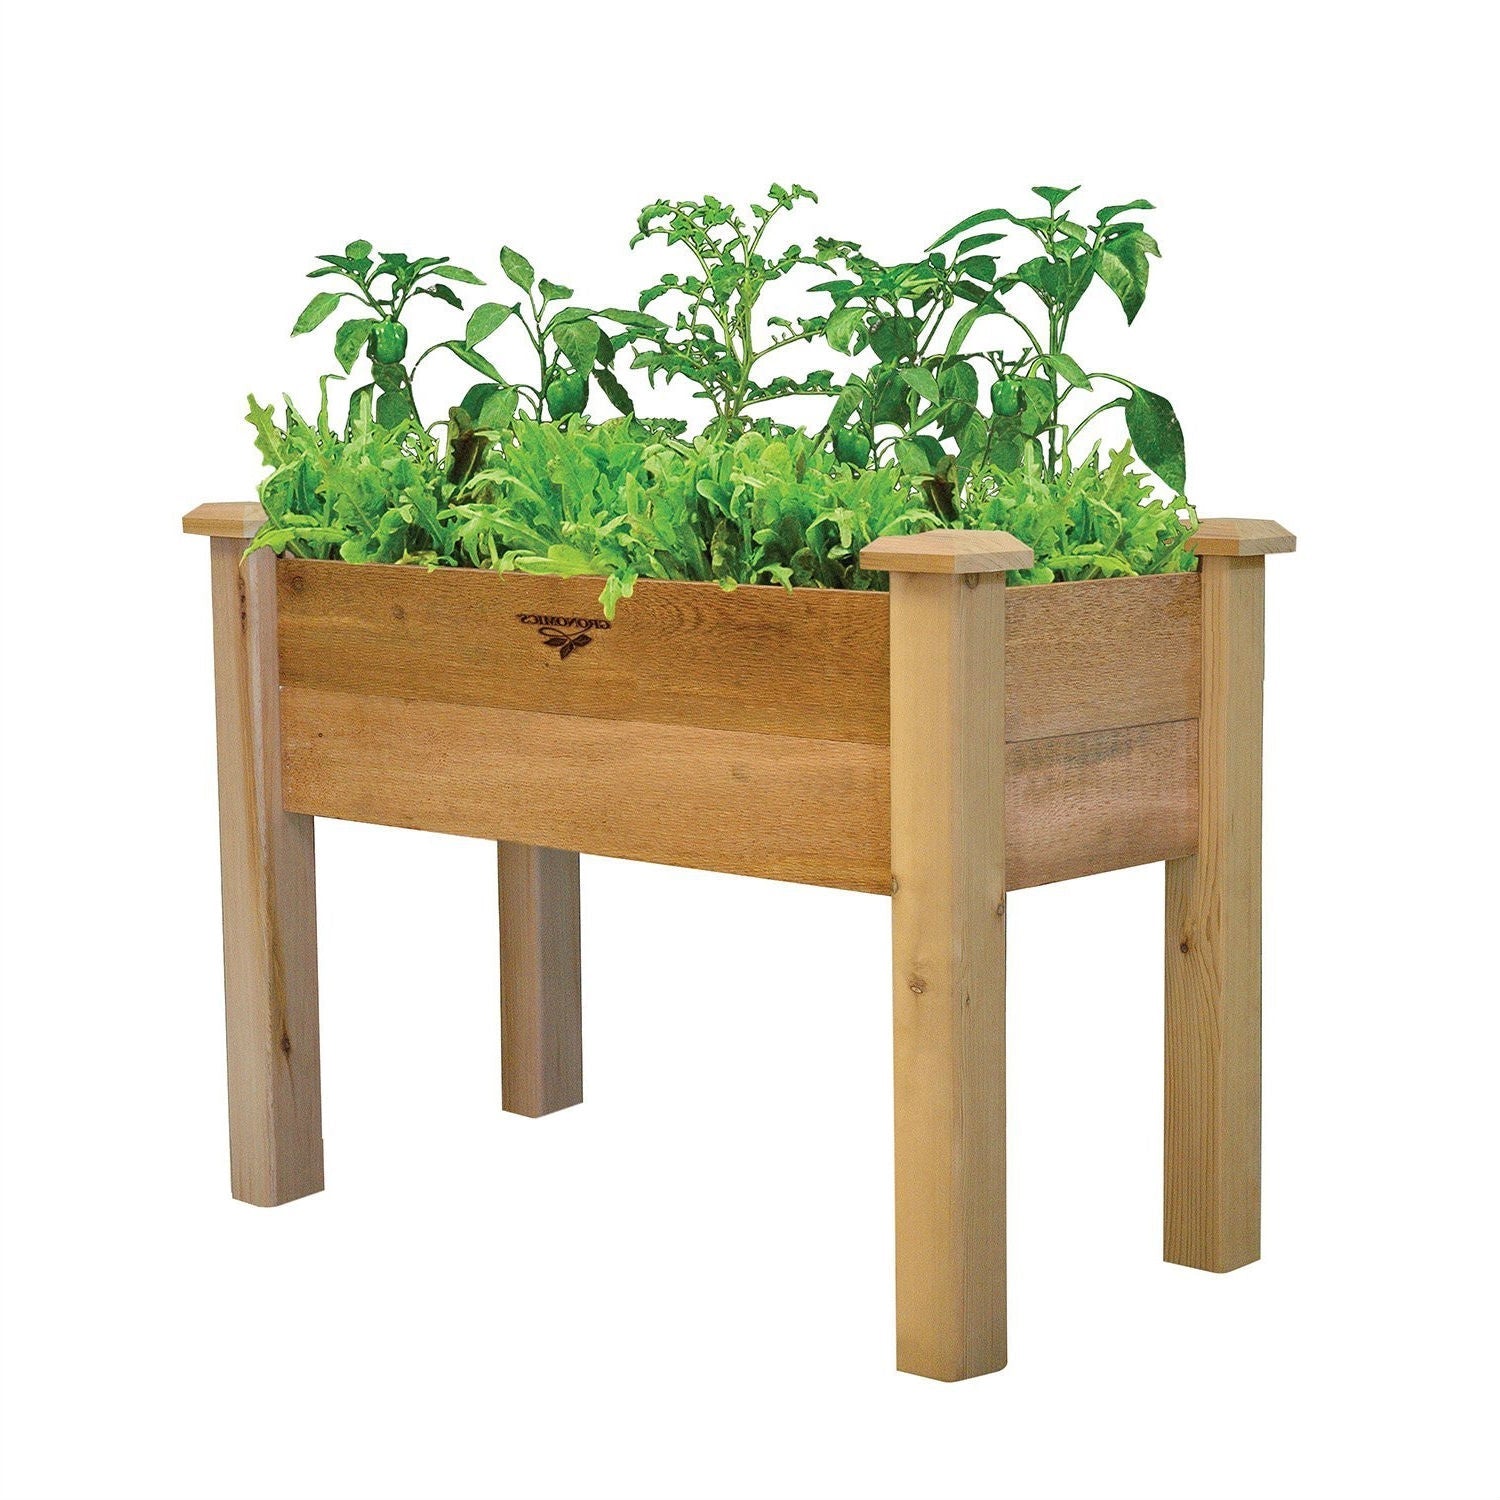 Raised Garden Bed Planter Box in Solid Cedar Wood in Natural Finish - 34-inch